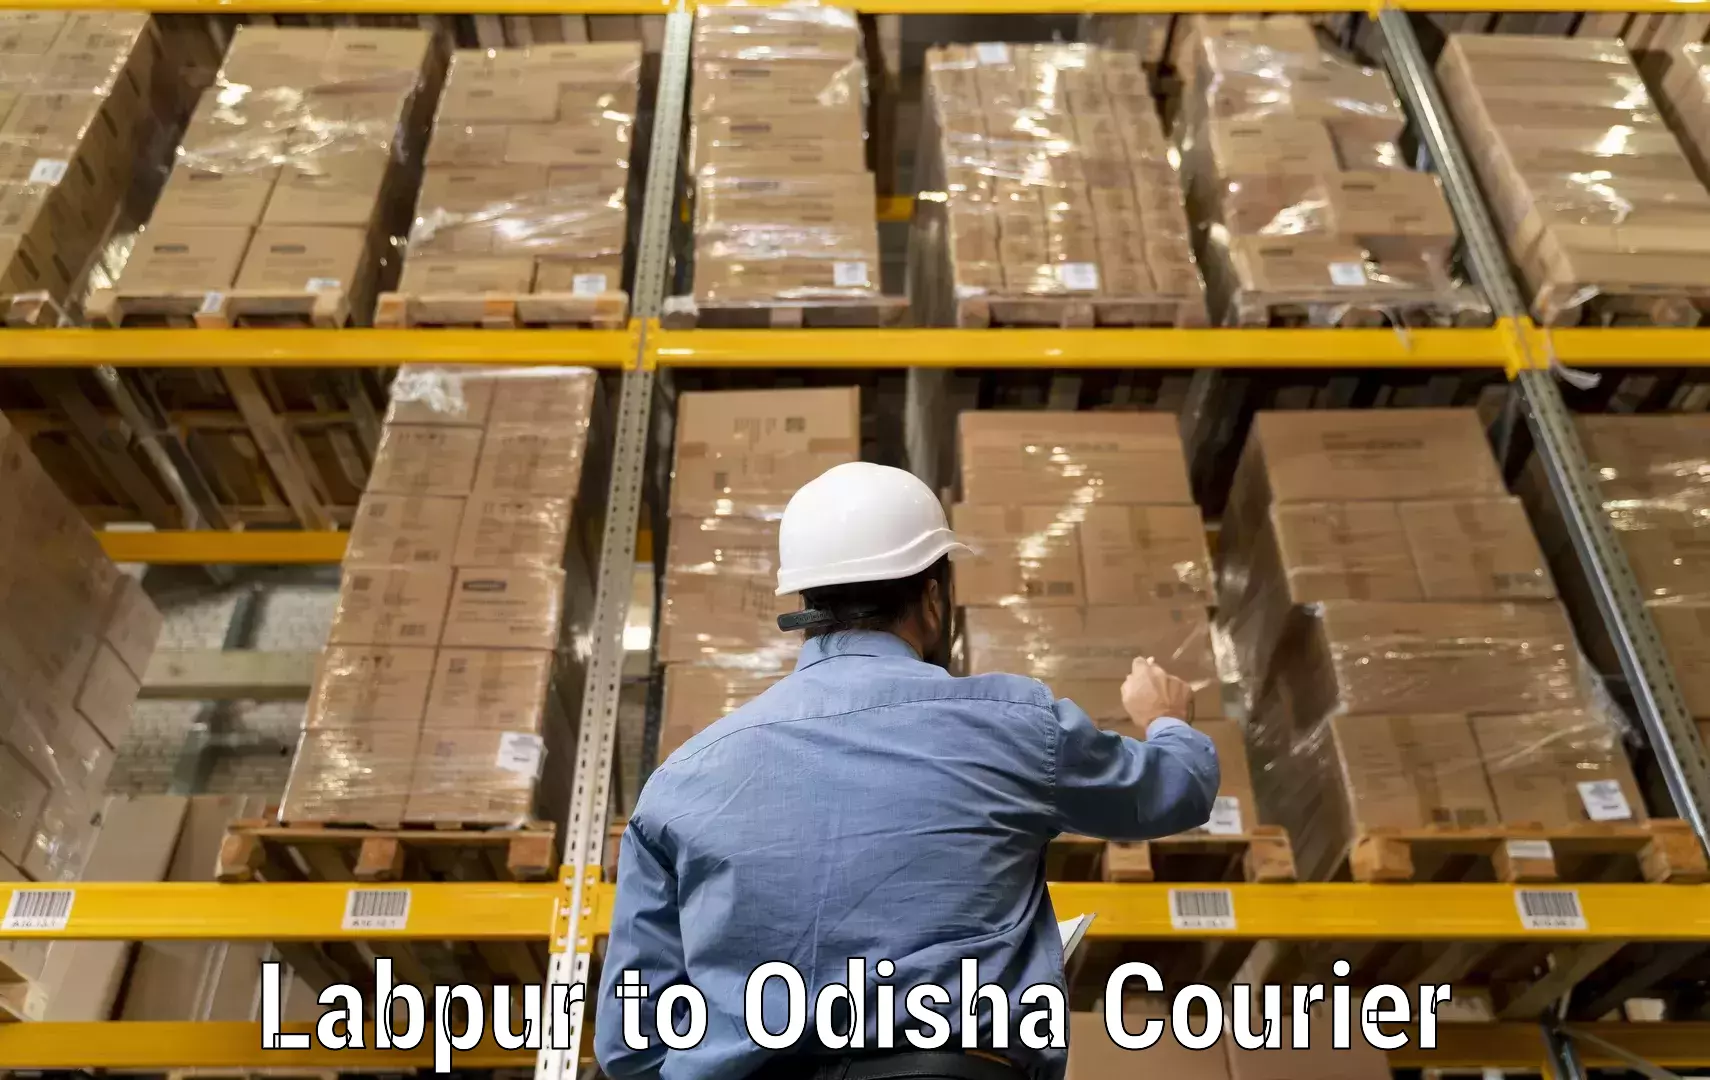 Professional courier services in Labpur to Muribahal